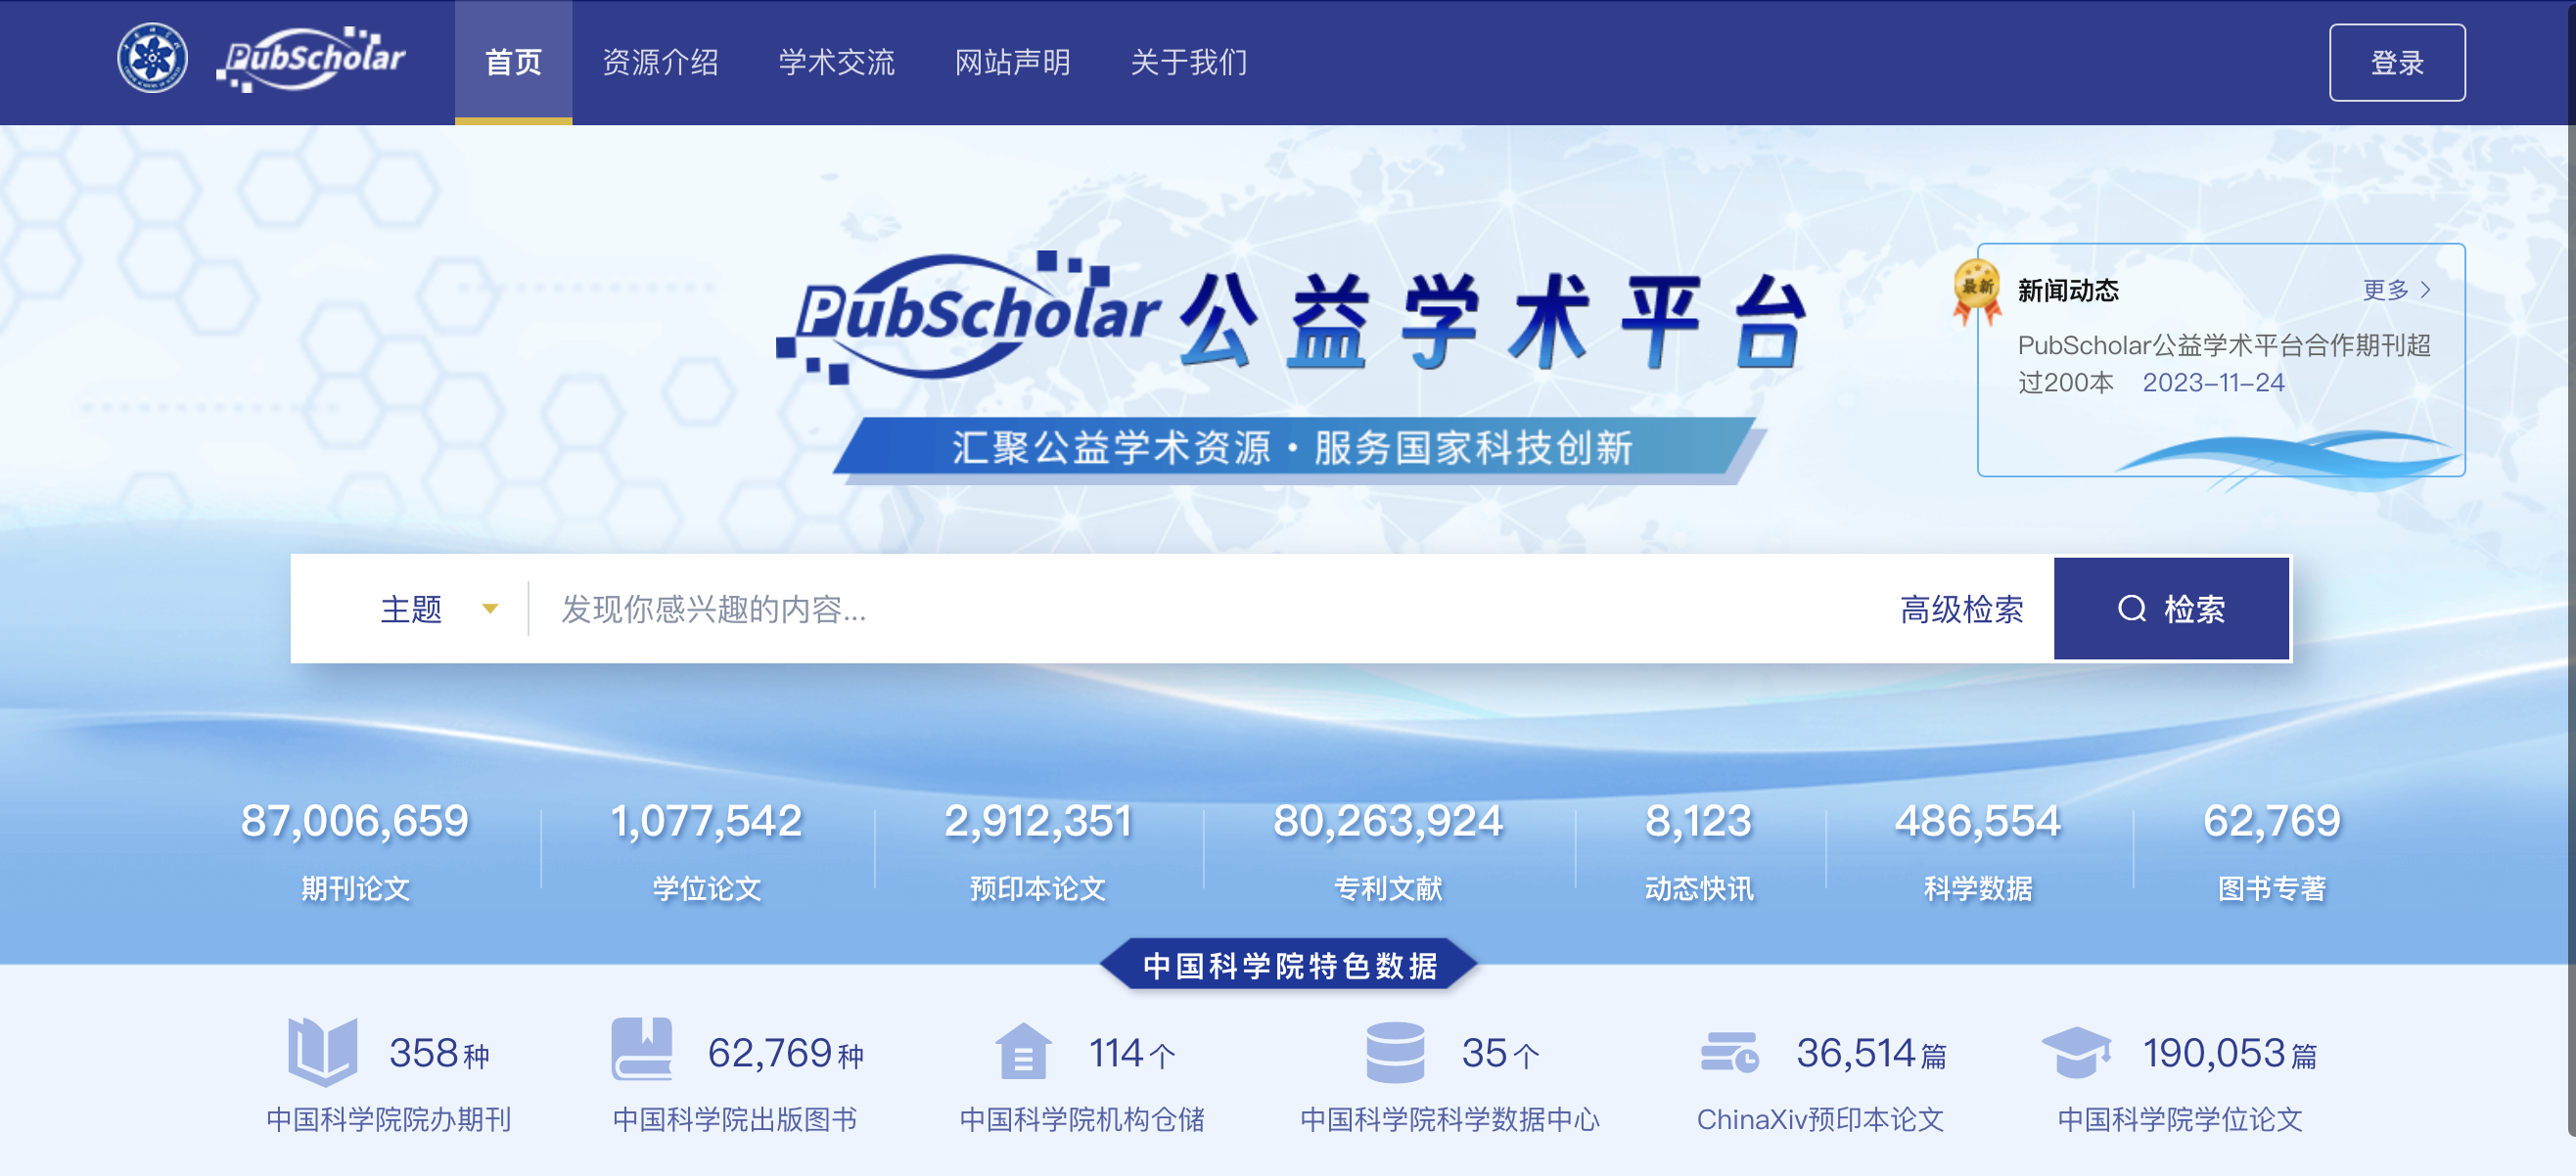 China’s PubScholar starts with 190 million documents, PubMed holds 36 million